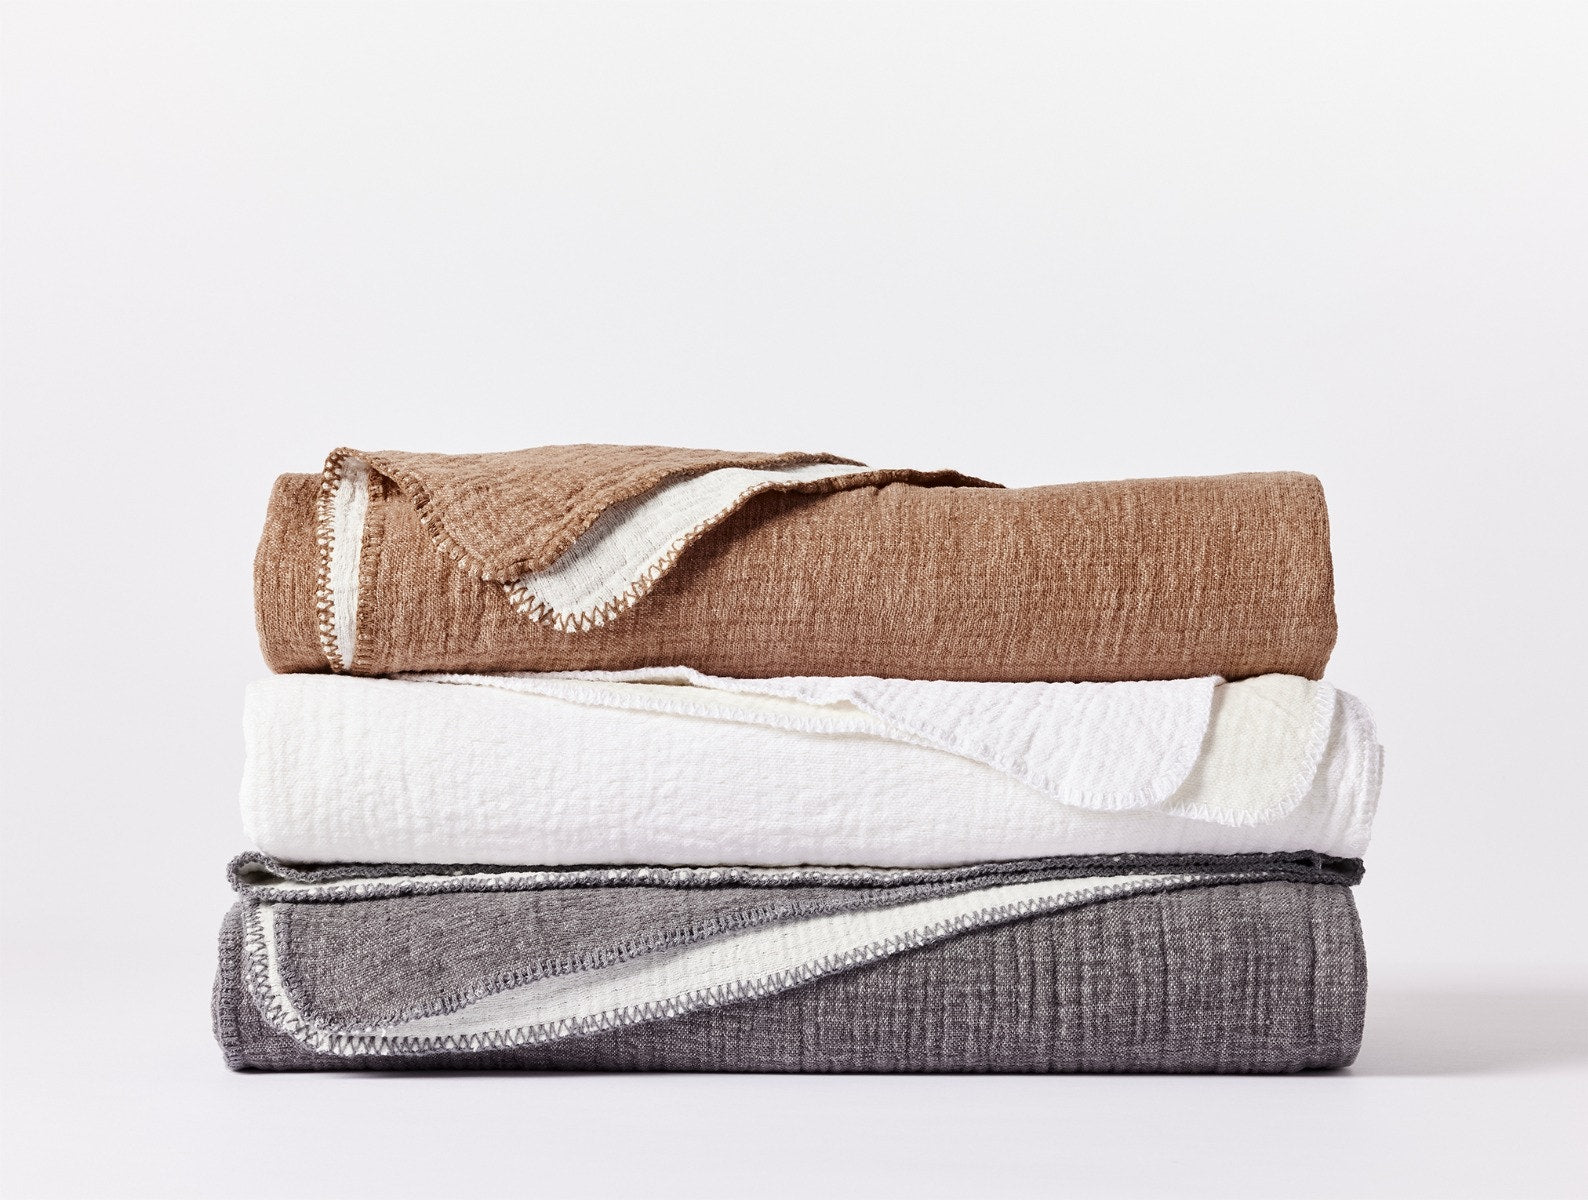 The 9 Best Heated Blankets and Throws for Ultimate Coziness